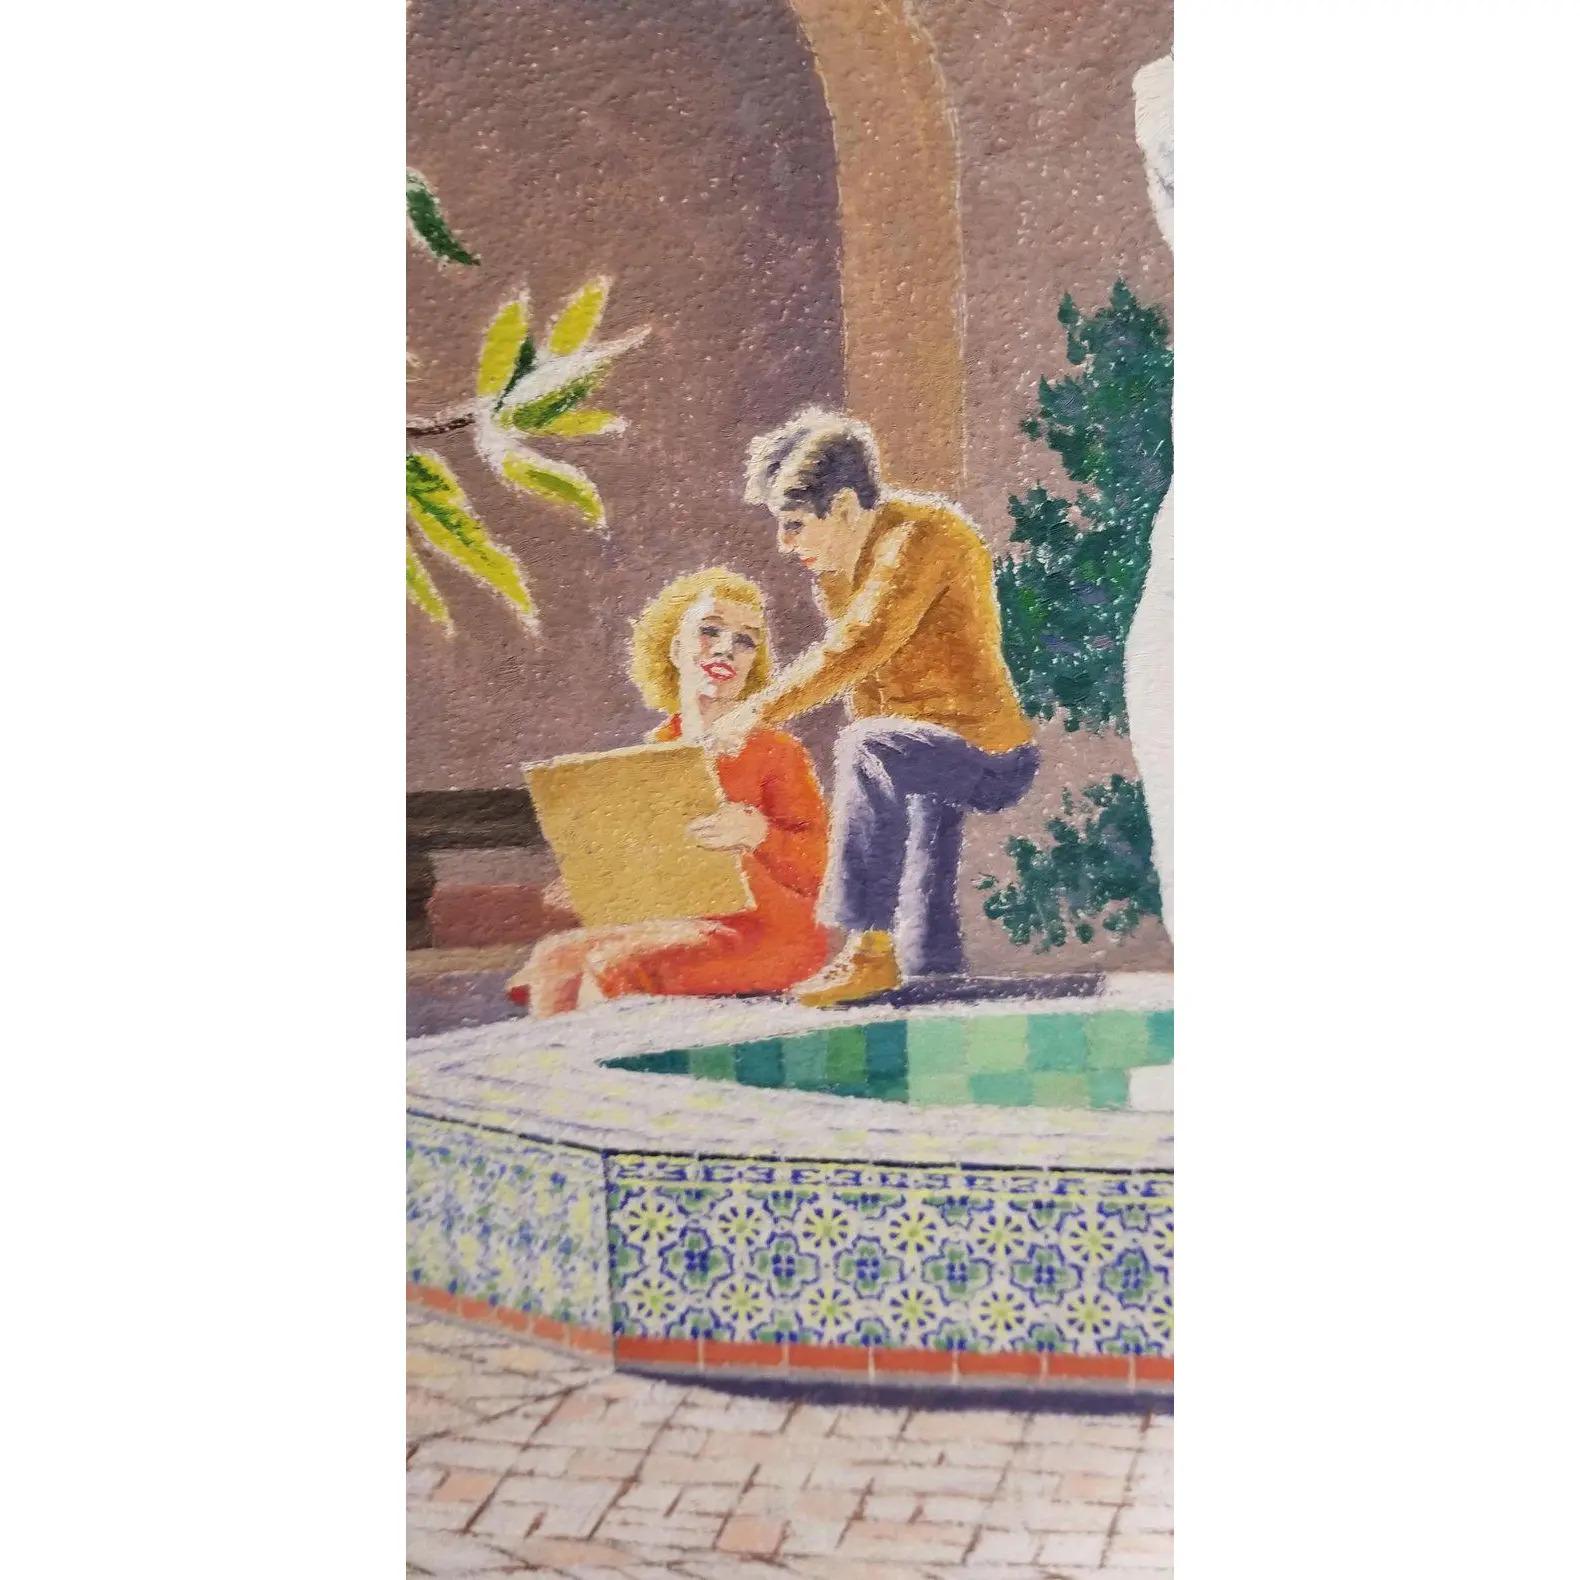 1950s painting depicting the California School of Fine Art in San Francisco in 1953. Dakin was a student of this school. Notice California Art Tile fountain, and figures discussing art in courtyard. Signed lower right. Unframed.

William Norris